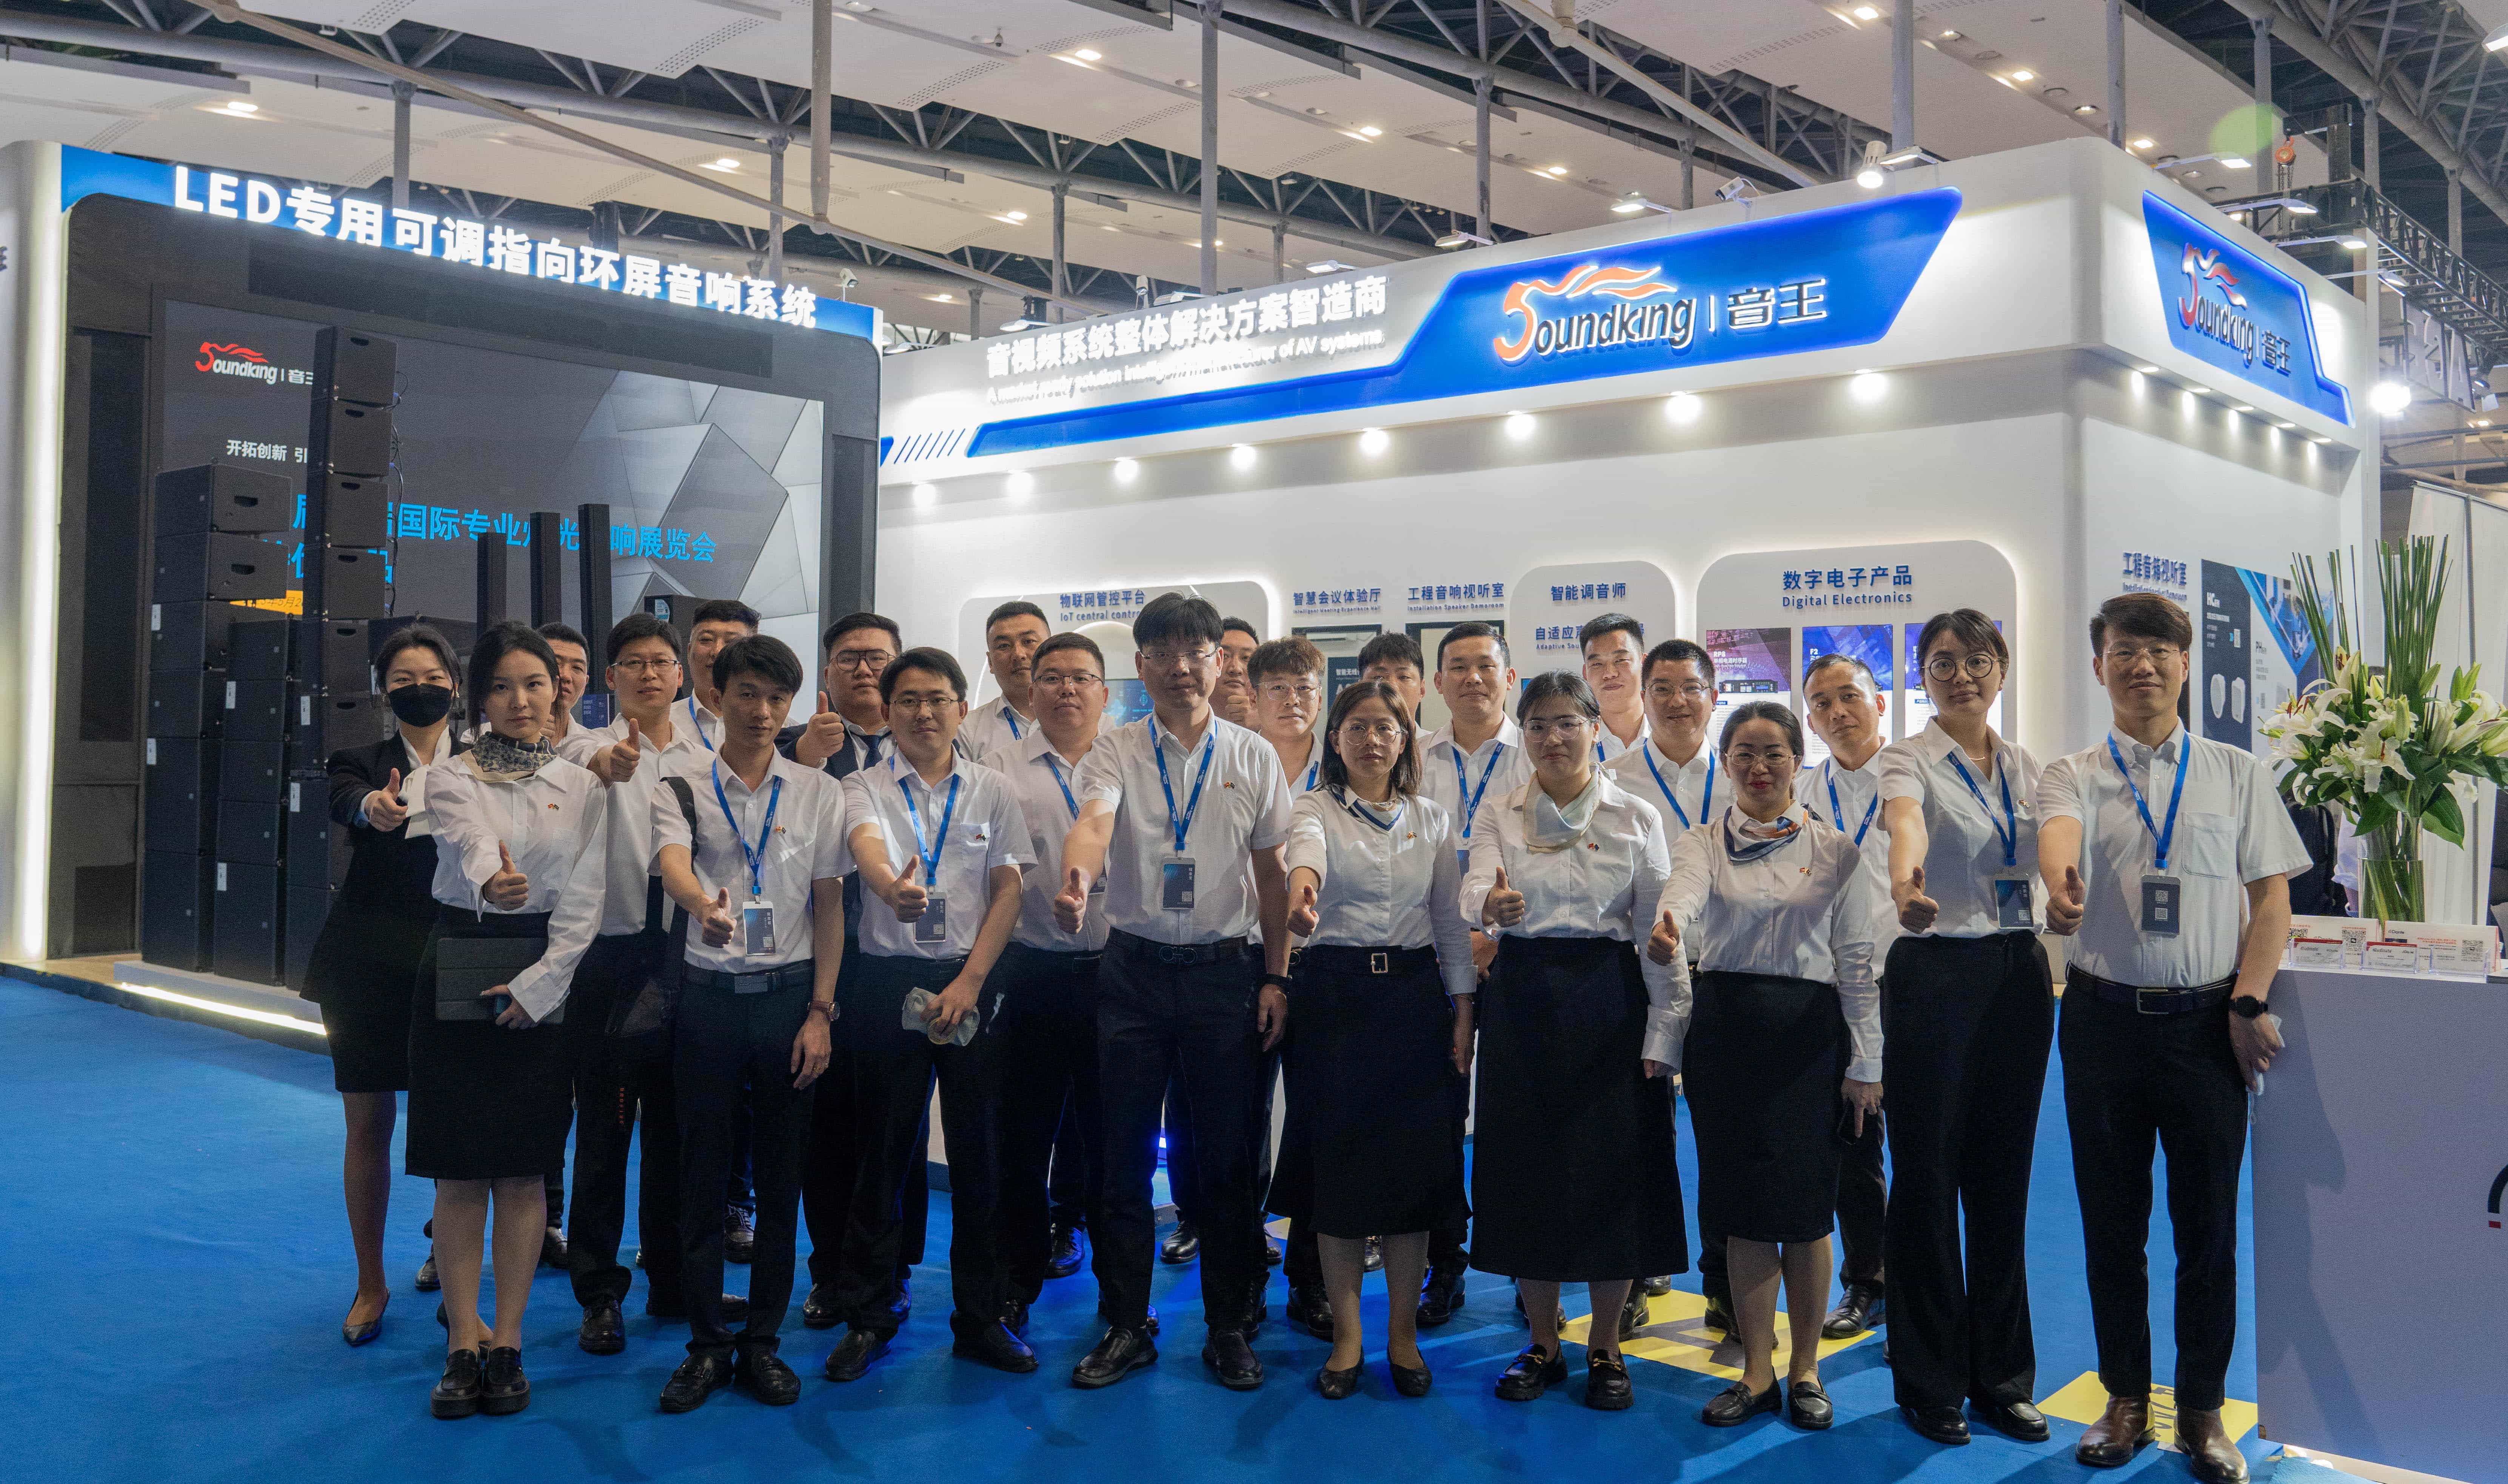 Soundking Focuses on the Future Development Pulse of Intelligent Audiovisual Technology | Live report on the 21st Guangzhou International Professional Light and Sound Exhibition